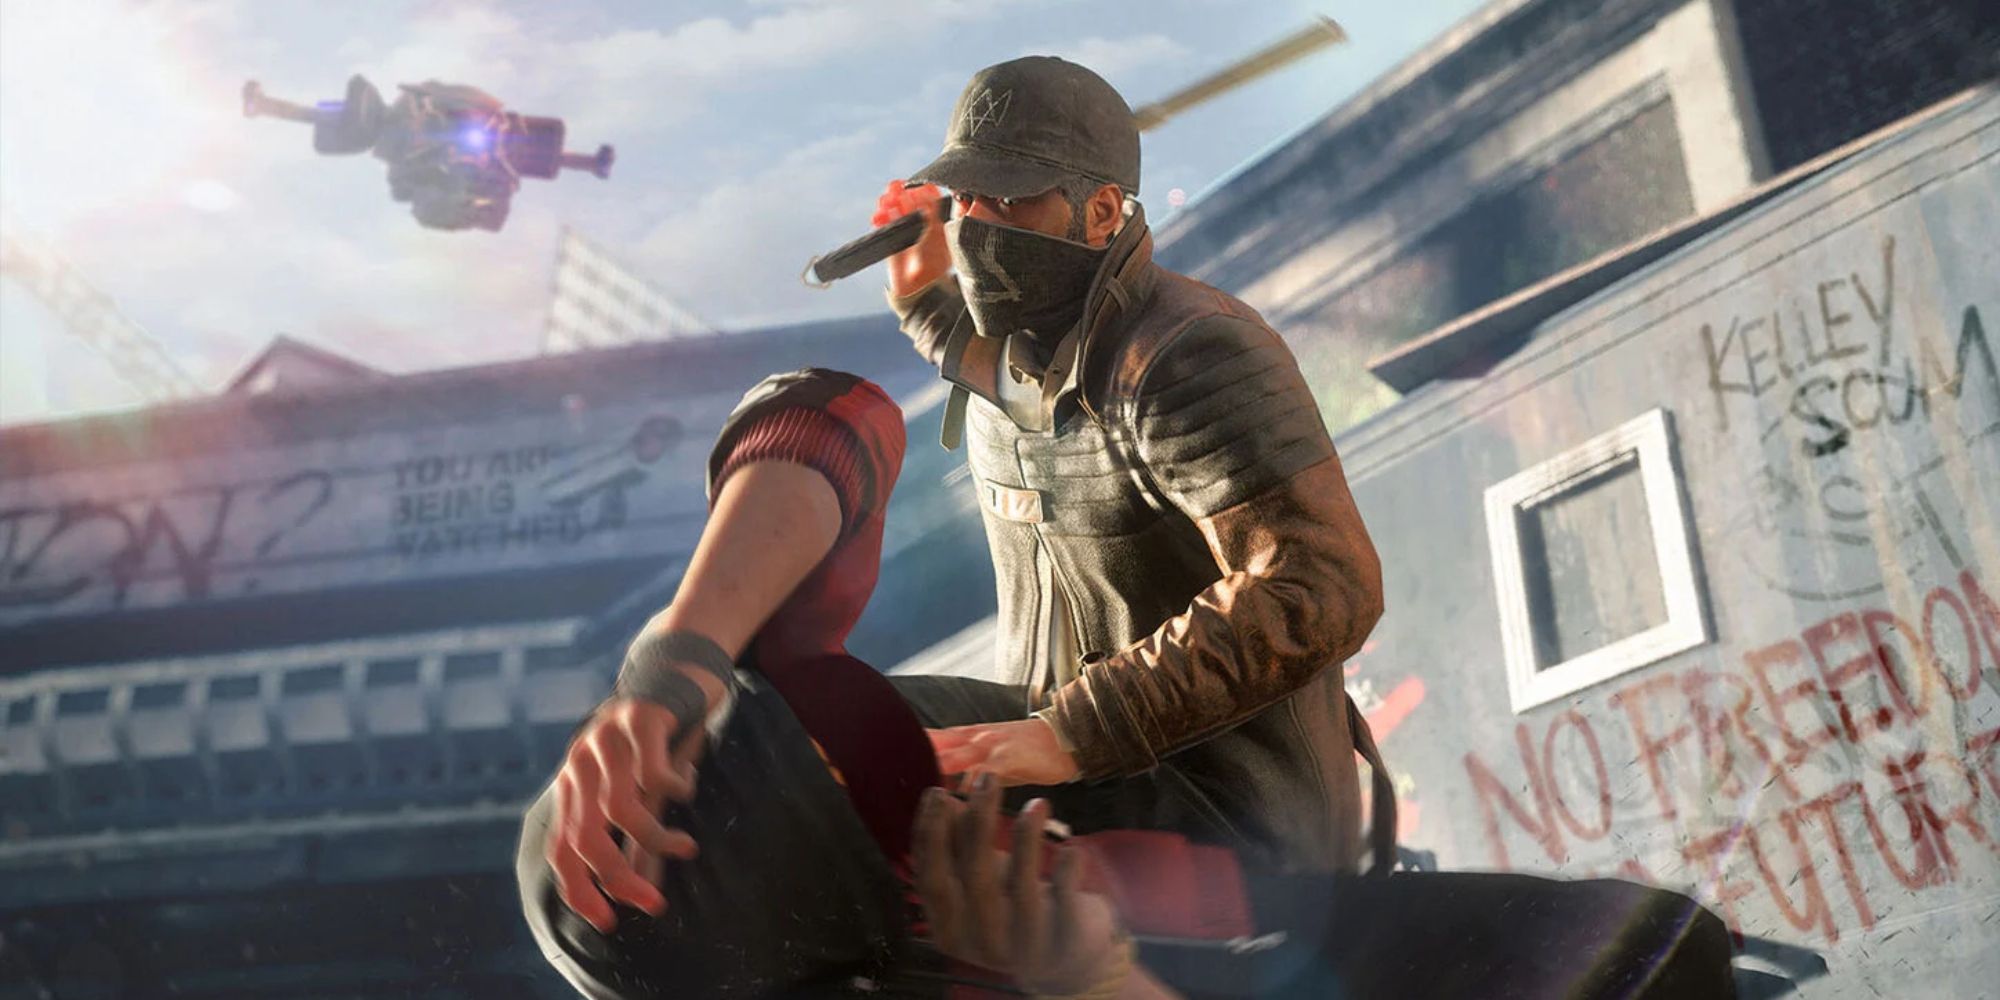 Watch Dogs Legion Bloodline Screenshot Of Aiden Pearce Attacking Someone